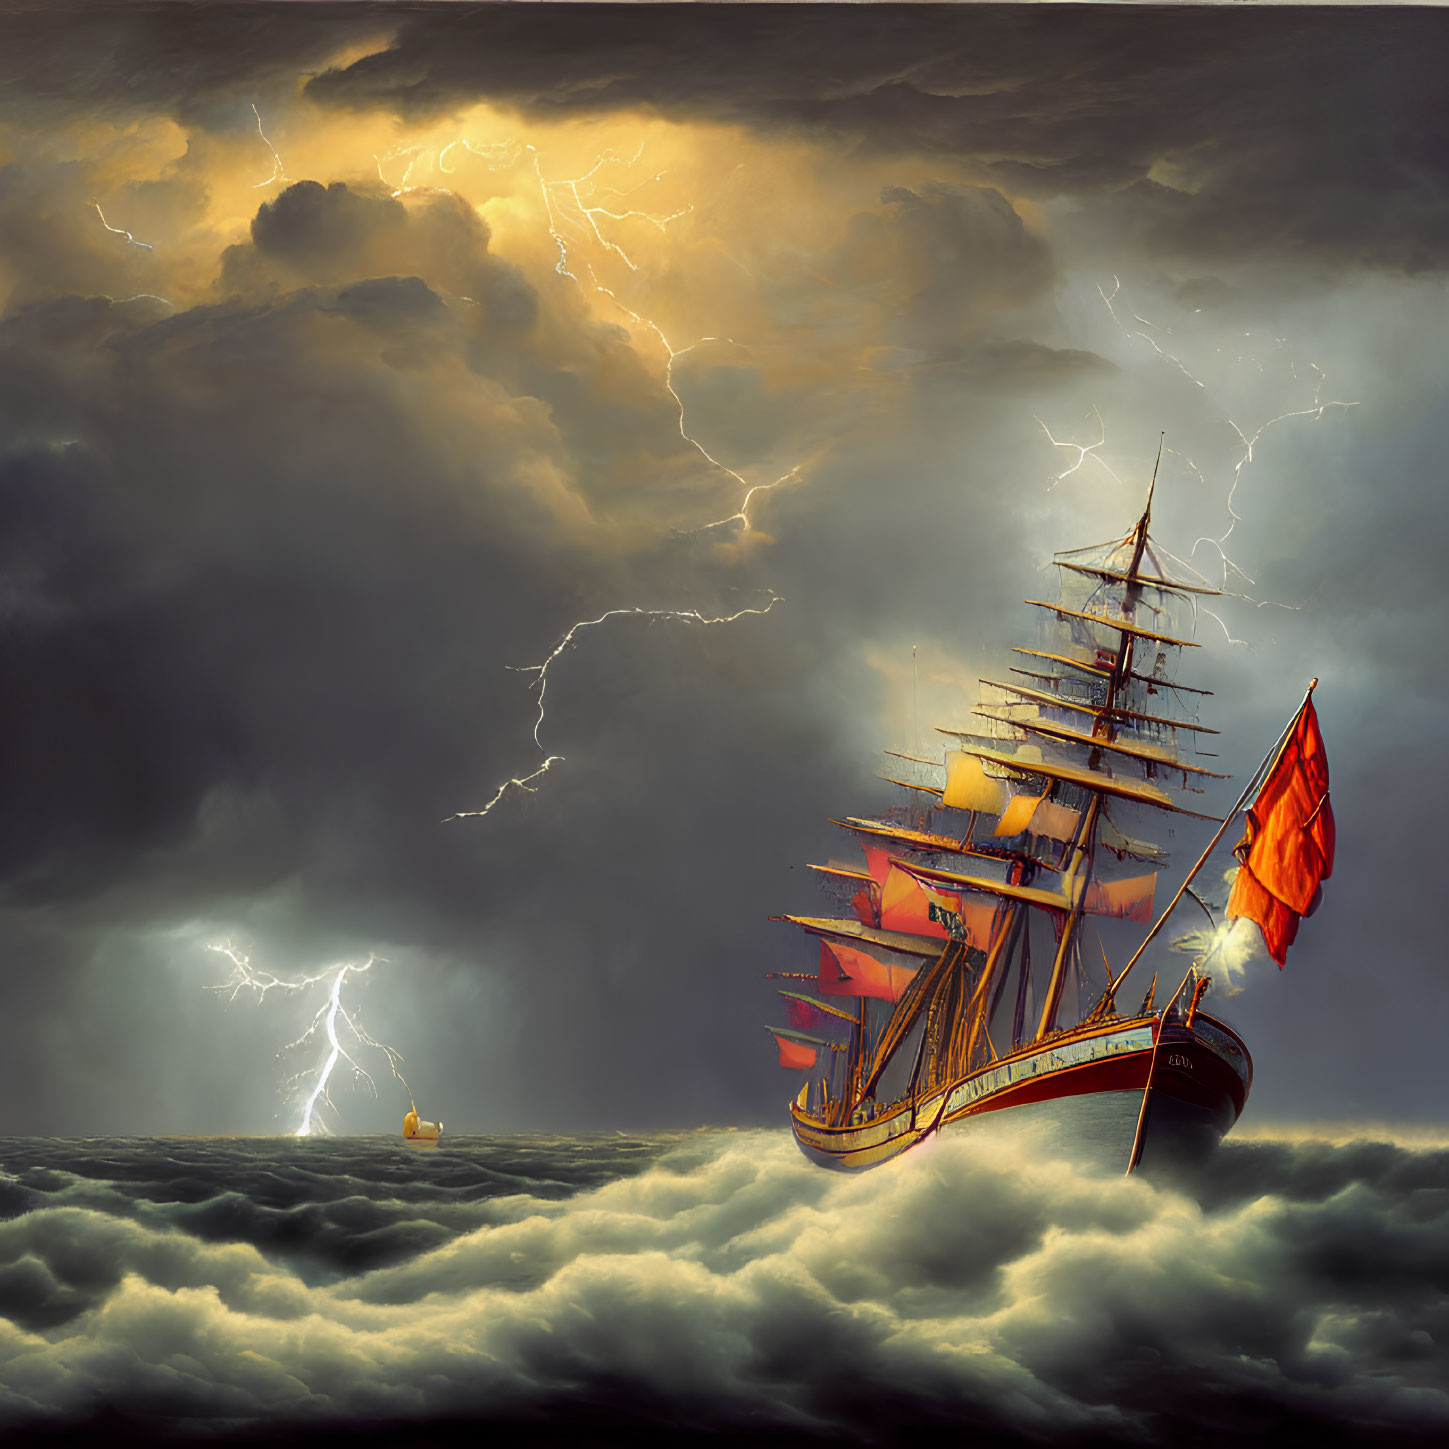 Majestic sailing ship with red sails in stormy sea with lightning